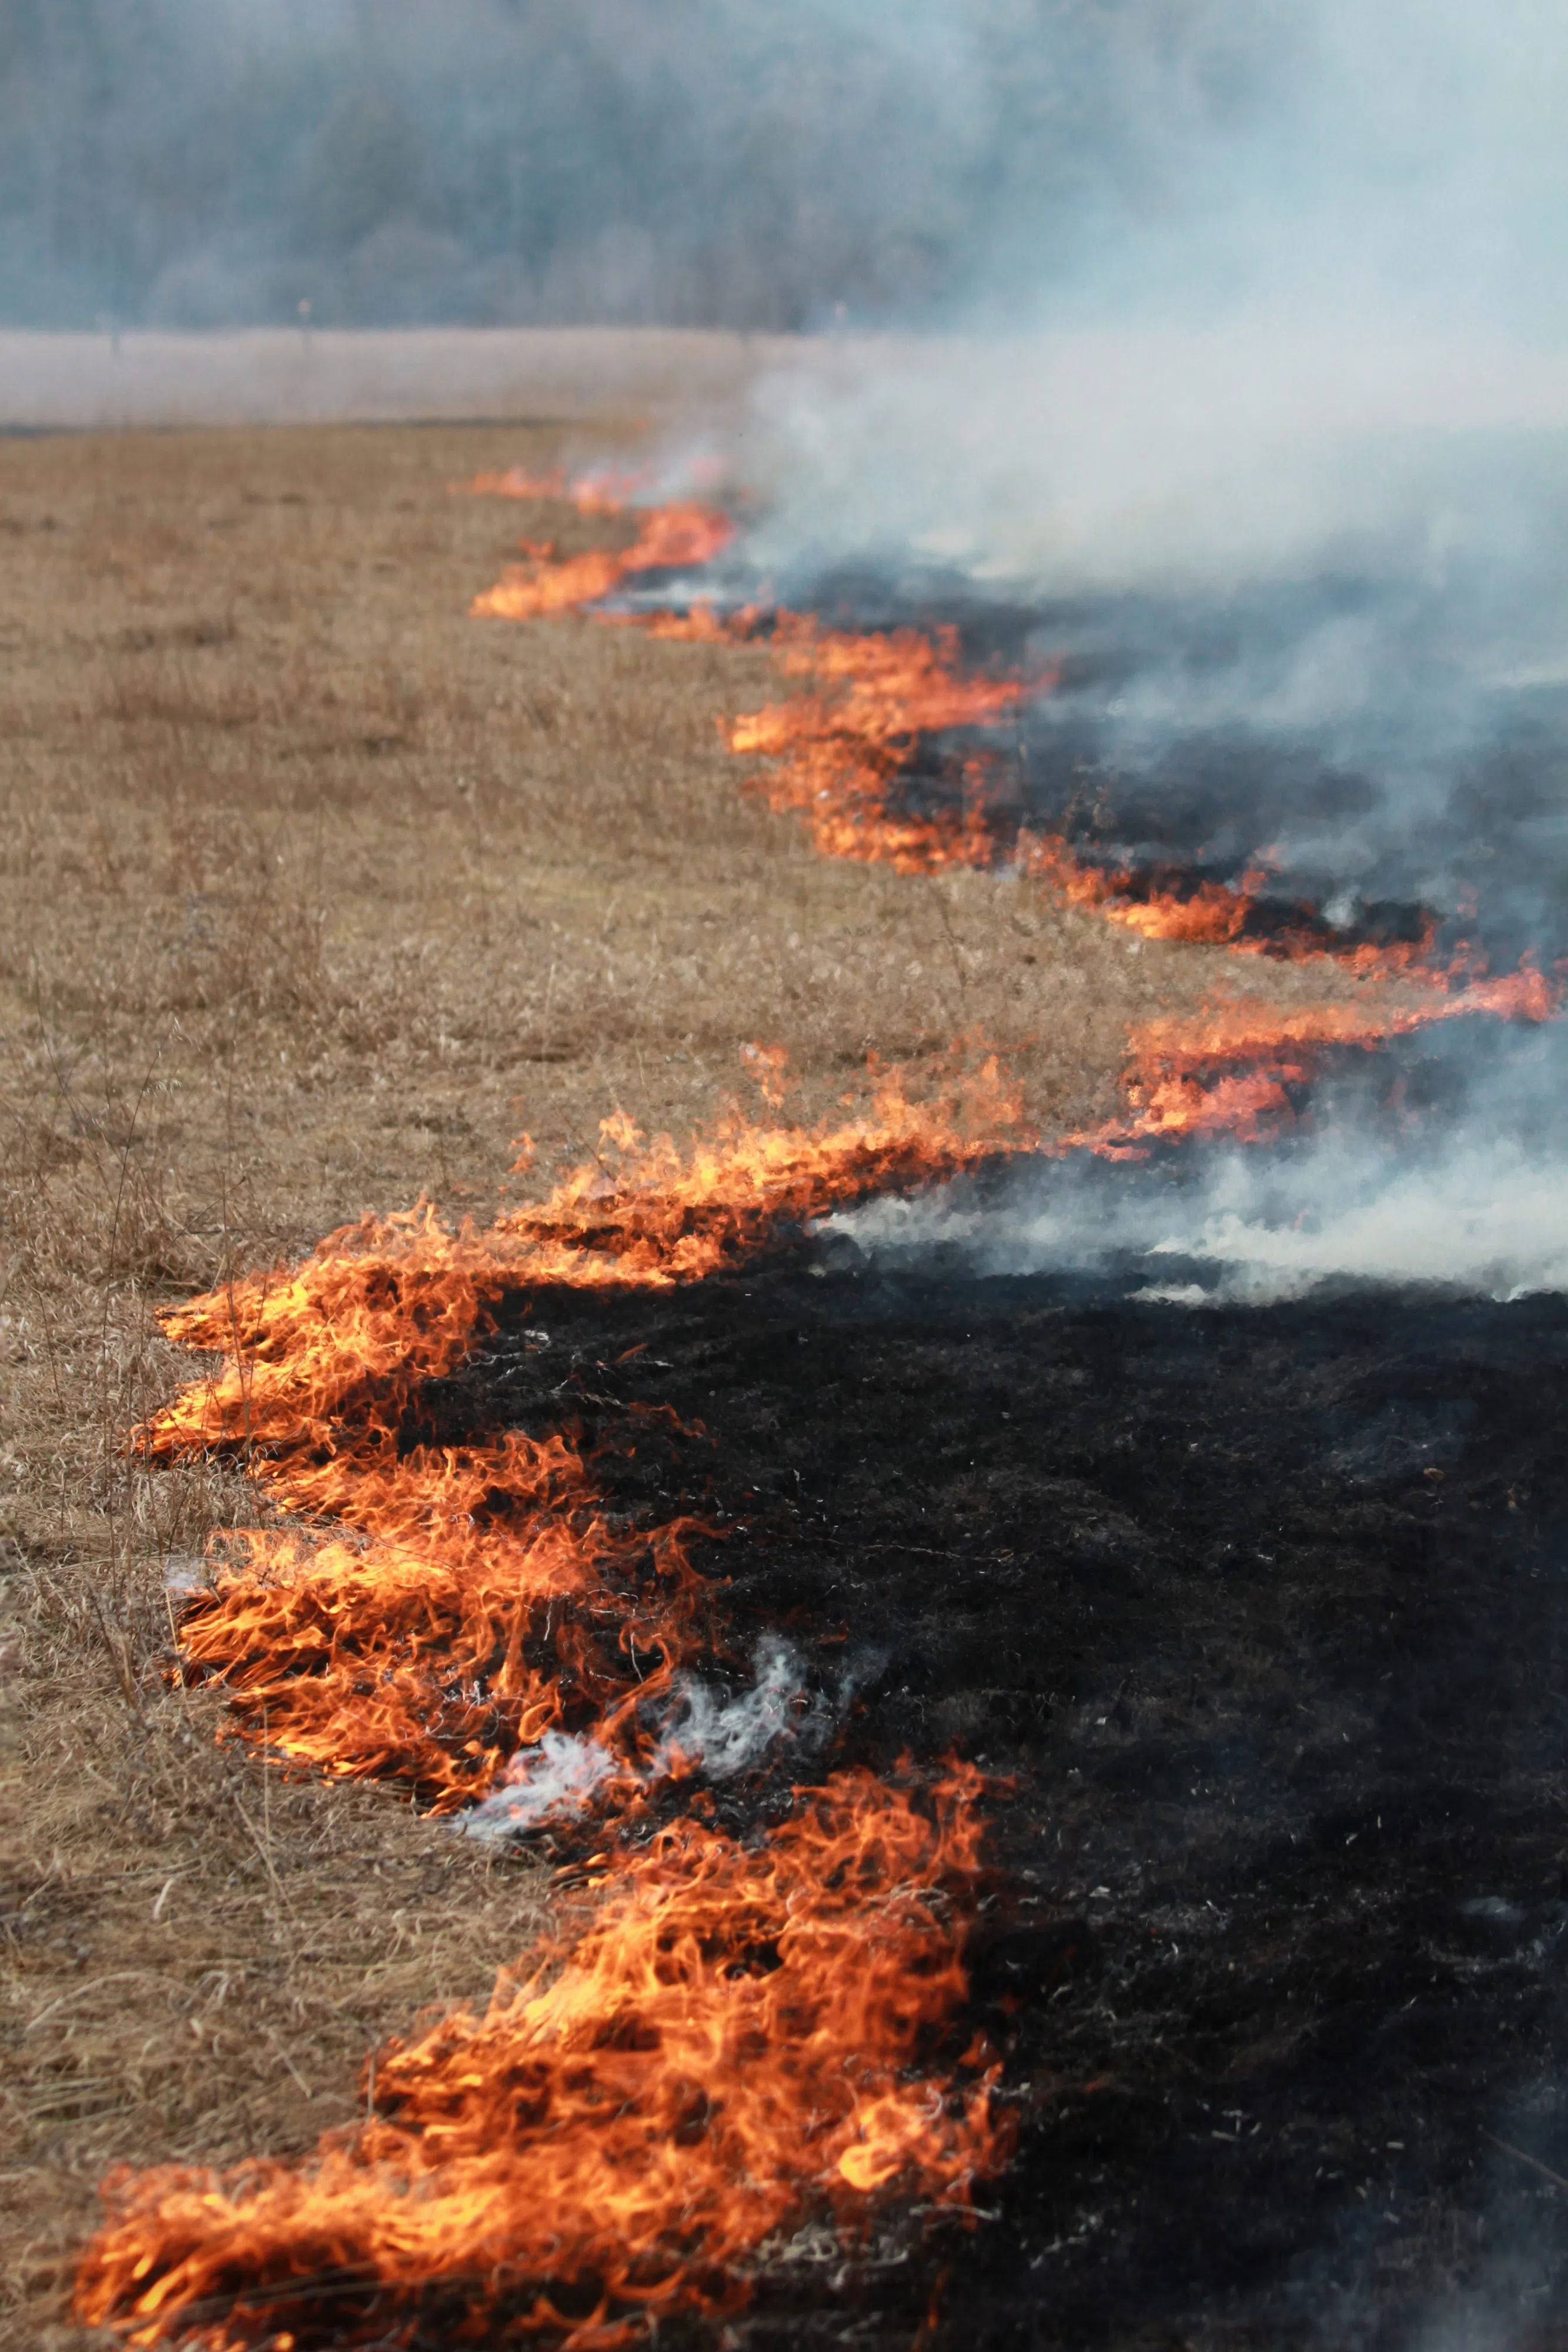 NCC conducting controlled burning in Northumberland County/Rice Lake Plains